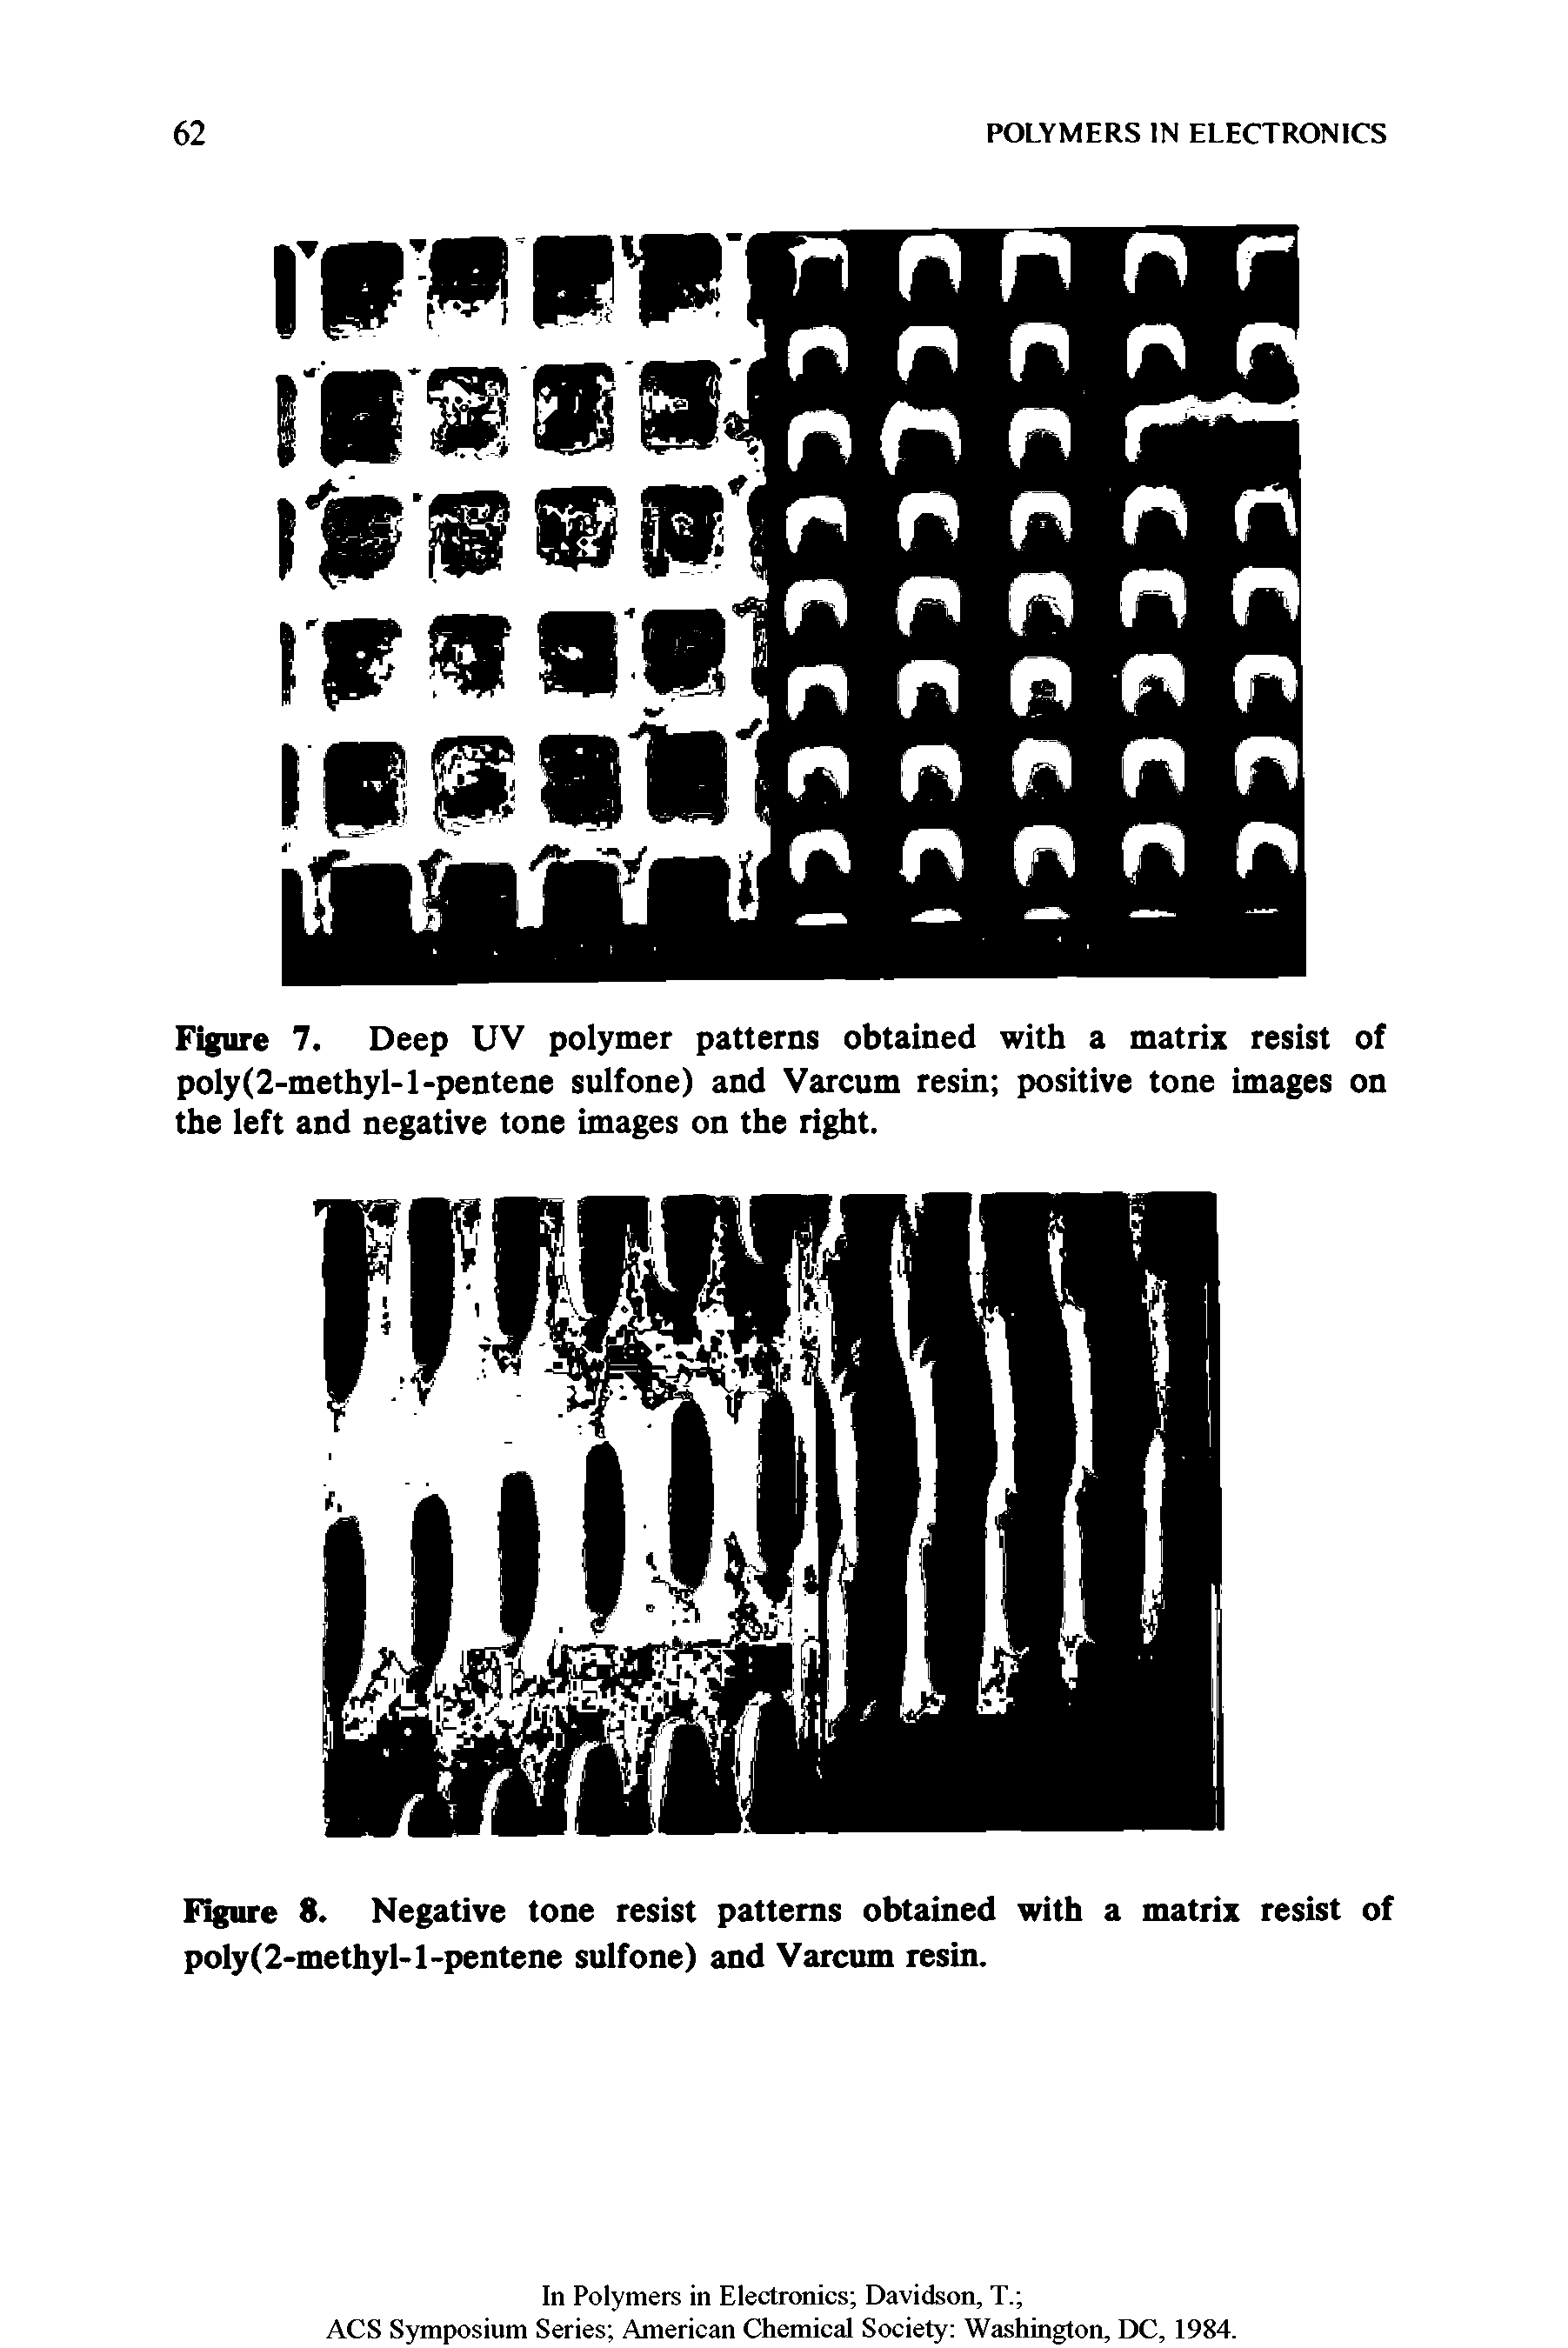 Figure 8. Negative tone resist patterns obtained with a matrix resist of poly(2-methyl-l-pentene sulfone) and Varcum resin.